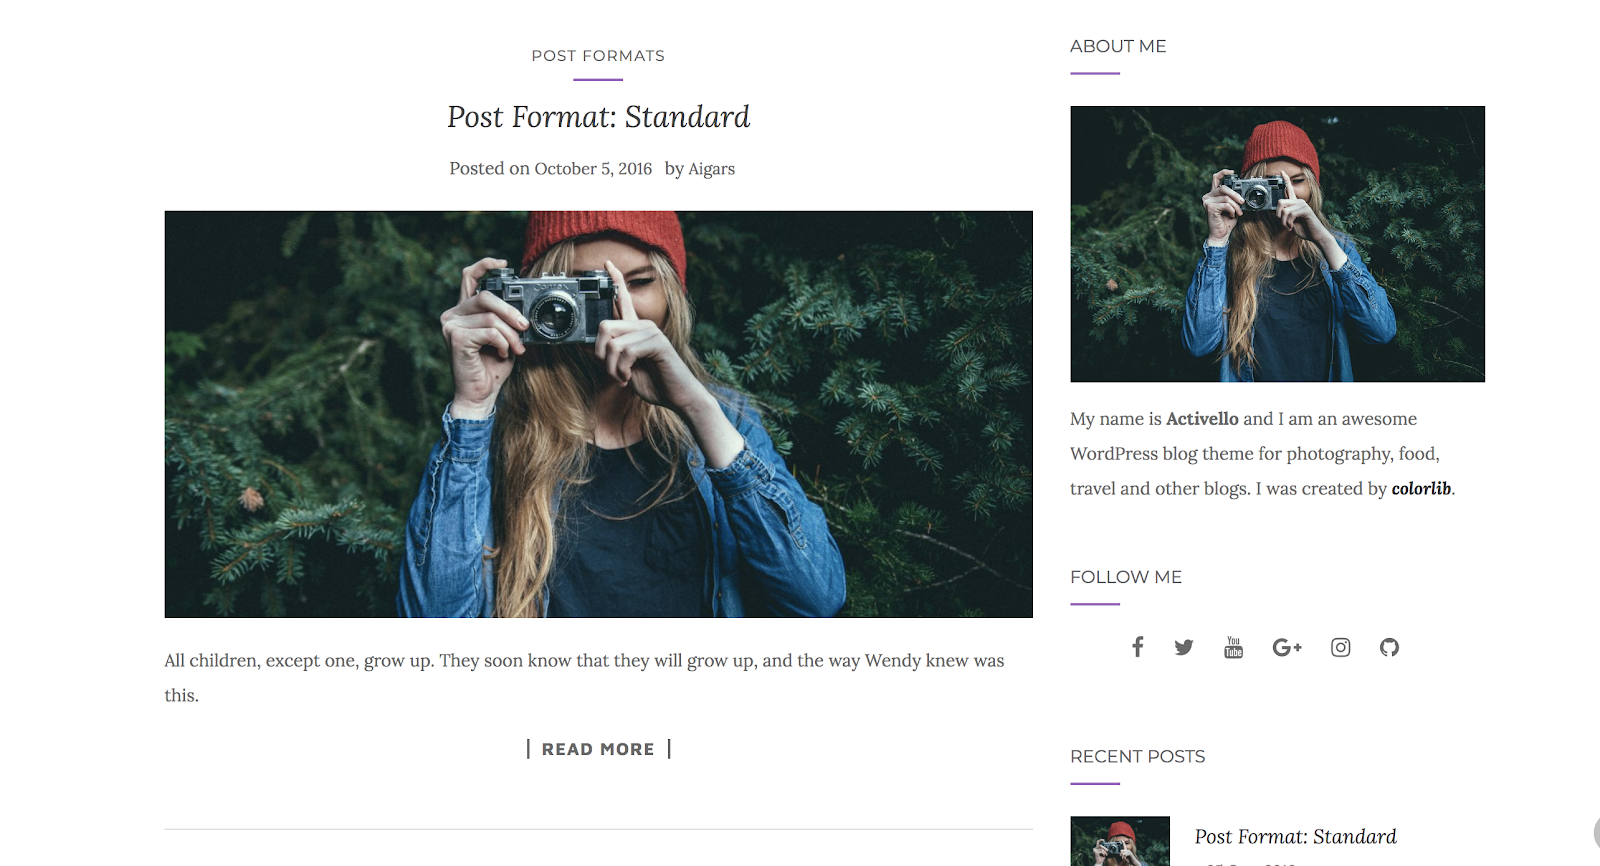 Screenshot of the Activello fashion blogging theme with the start of a post shown, plus a sidebar with About Me, Follow Me, and Recent Posts sections